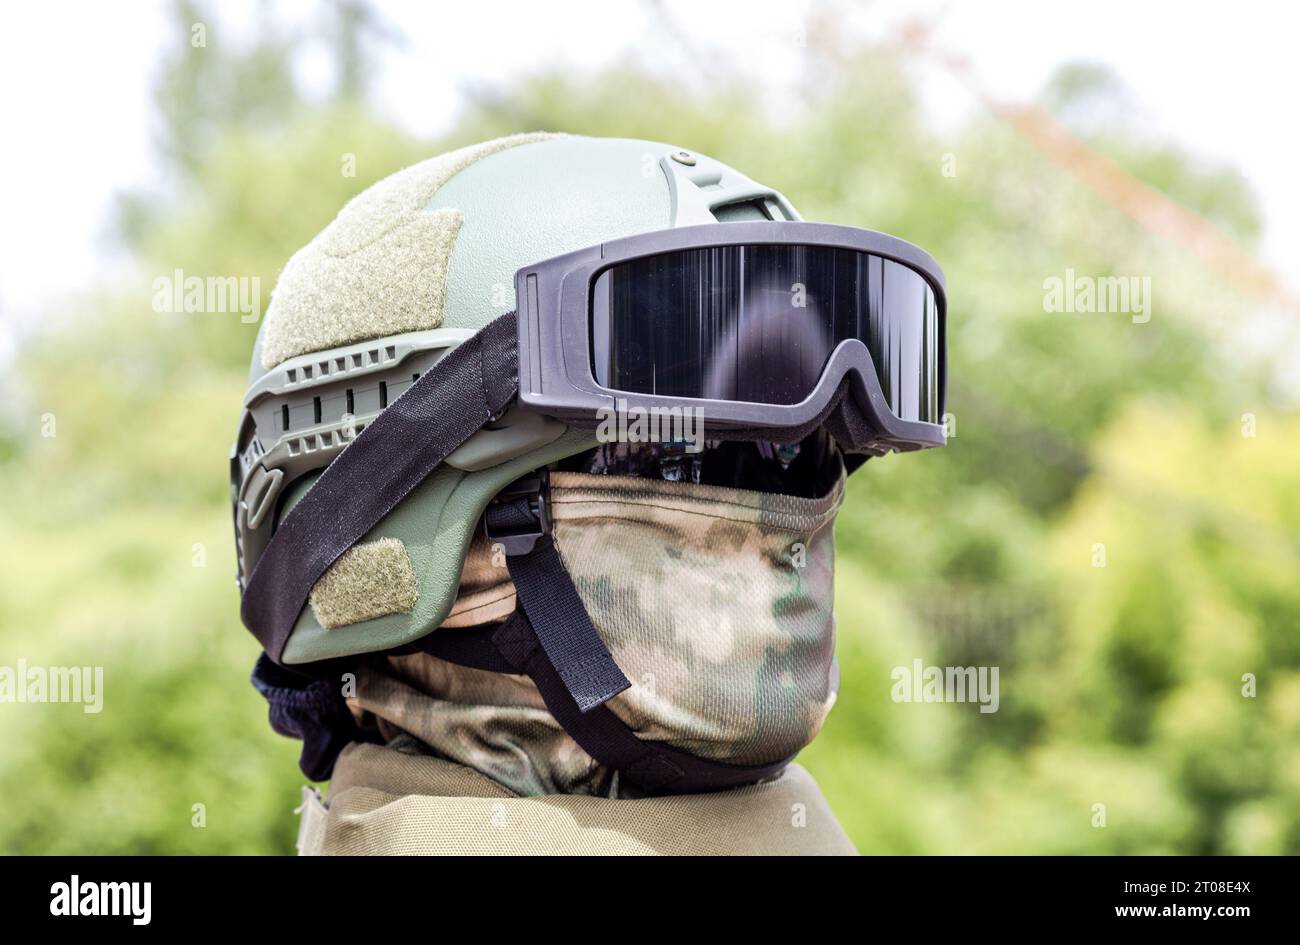 Army kevlar helmet to protect the head from bullets and shrapnel